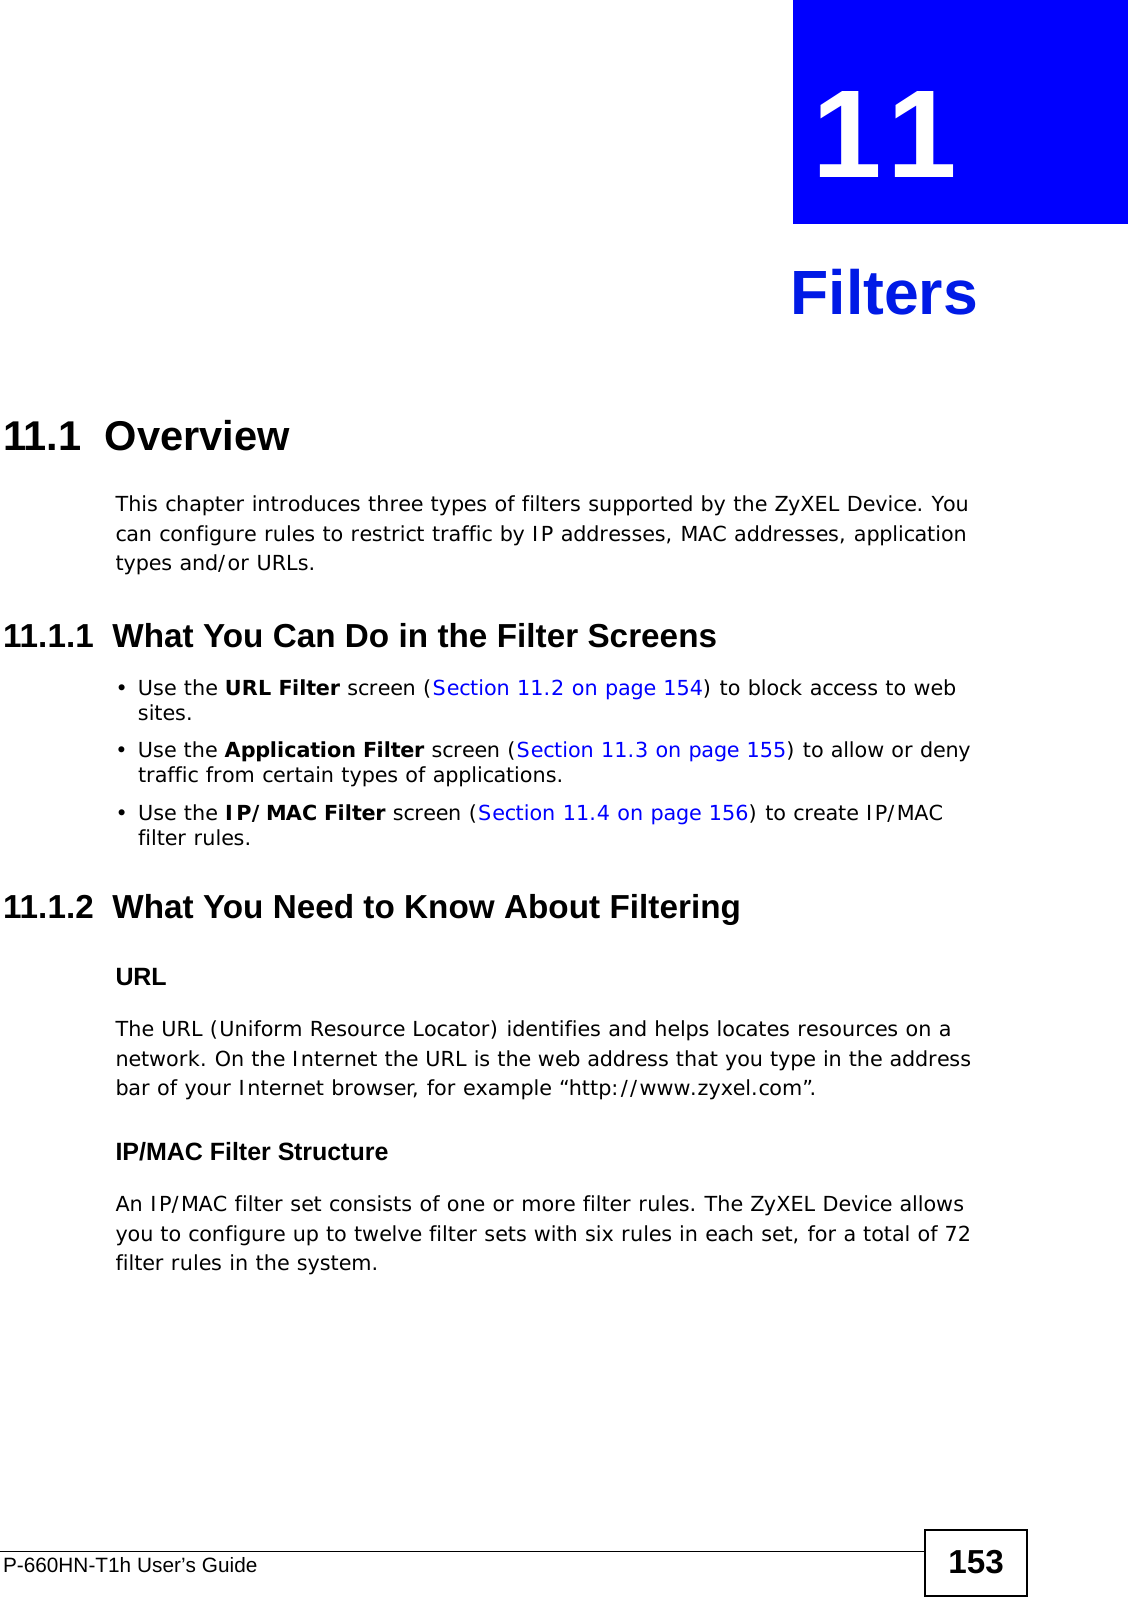 P-660HN-T1h User’s Guide 153CHAPTER  11 Filters11.1  Overview This chapter introduces three types of filters supported by the ZyXEL Device. You can configure rules to restrict traffic by IP addresses, MAC addresses, application types and/or URLs.11.1.1  What You Can Do in the Filter Screens•Use the URL Filter screen (Section 11.2 on page 154) to block access to web sites.•Use the Application Filter screen (Section 11.3 on page 155) to allow or deny traffic from certain types of applications.•Use the IP/MAC Filter screen (Section 11.4 on page 156) to create IP/MAC filter rules.11.1.2  What You Need to Know About FilteringURLThe URL (Uniform Resource Locator) identifies and helps locates resources on a network. On the Internet the URL is the web address that you type in the address bar of your Internet browser, for example “http://www.zyxel.com”.IP/MAC Filter StructureAn IP/MAC filter set consists of one or more filter rules. The ZyXEL Device allows you to configure up to twelve filter sets with six rules in each set, for a total of 72 filter rules in the system.